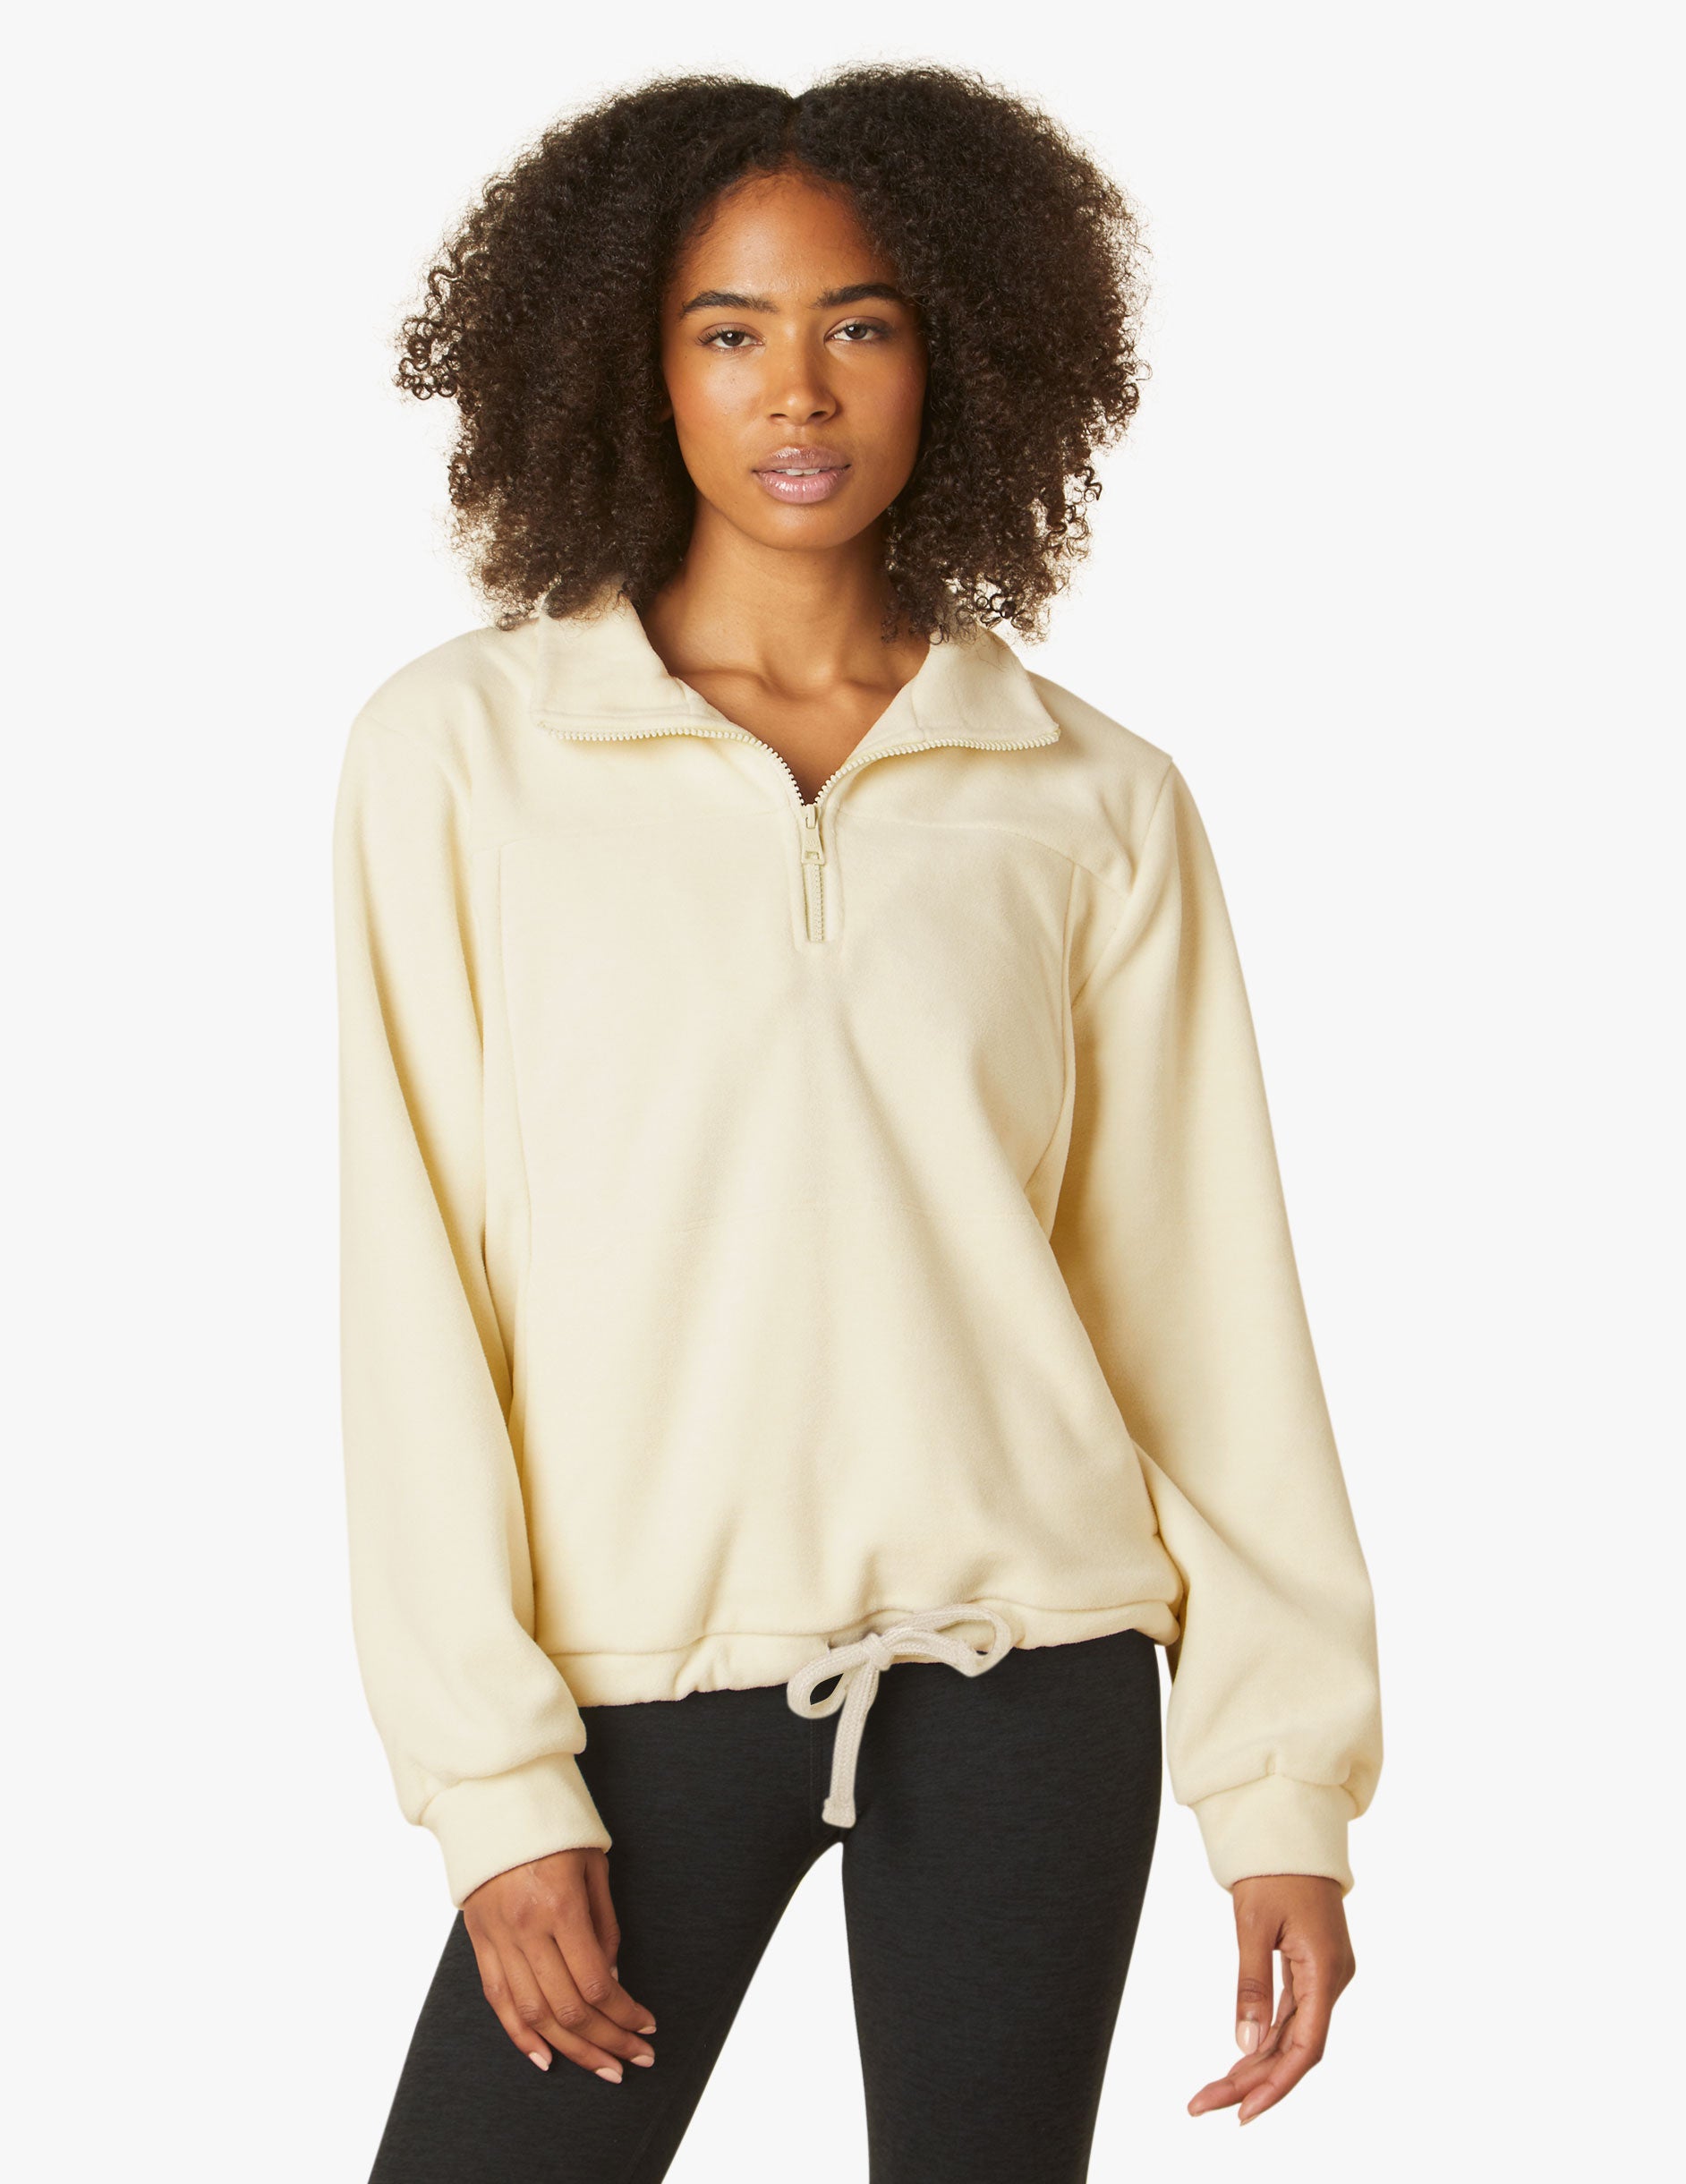 beige quater zip pullover with drawstring at waist